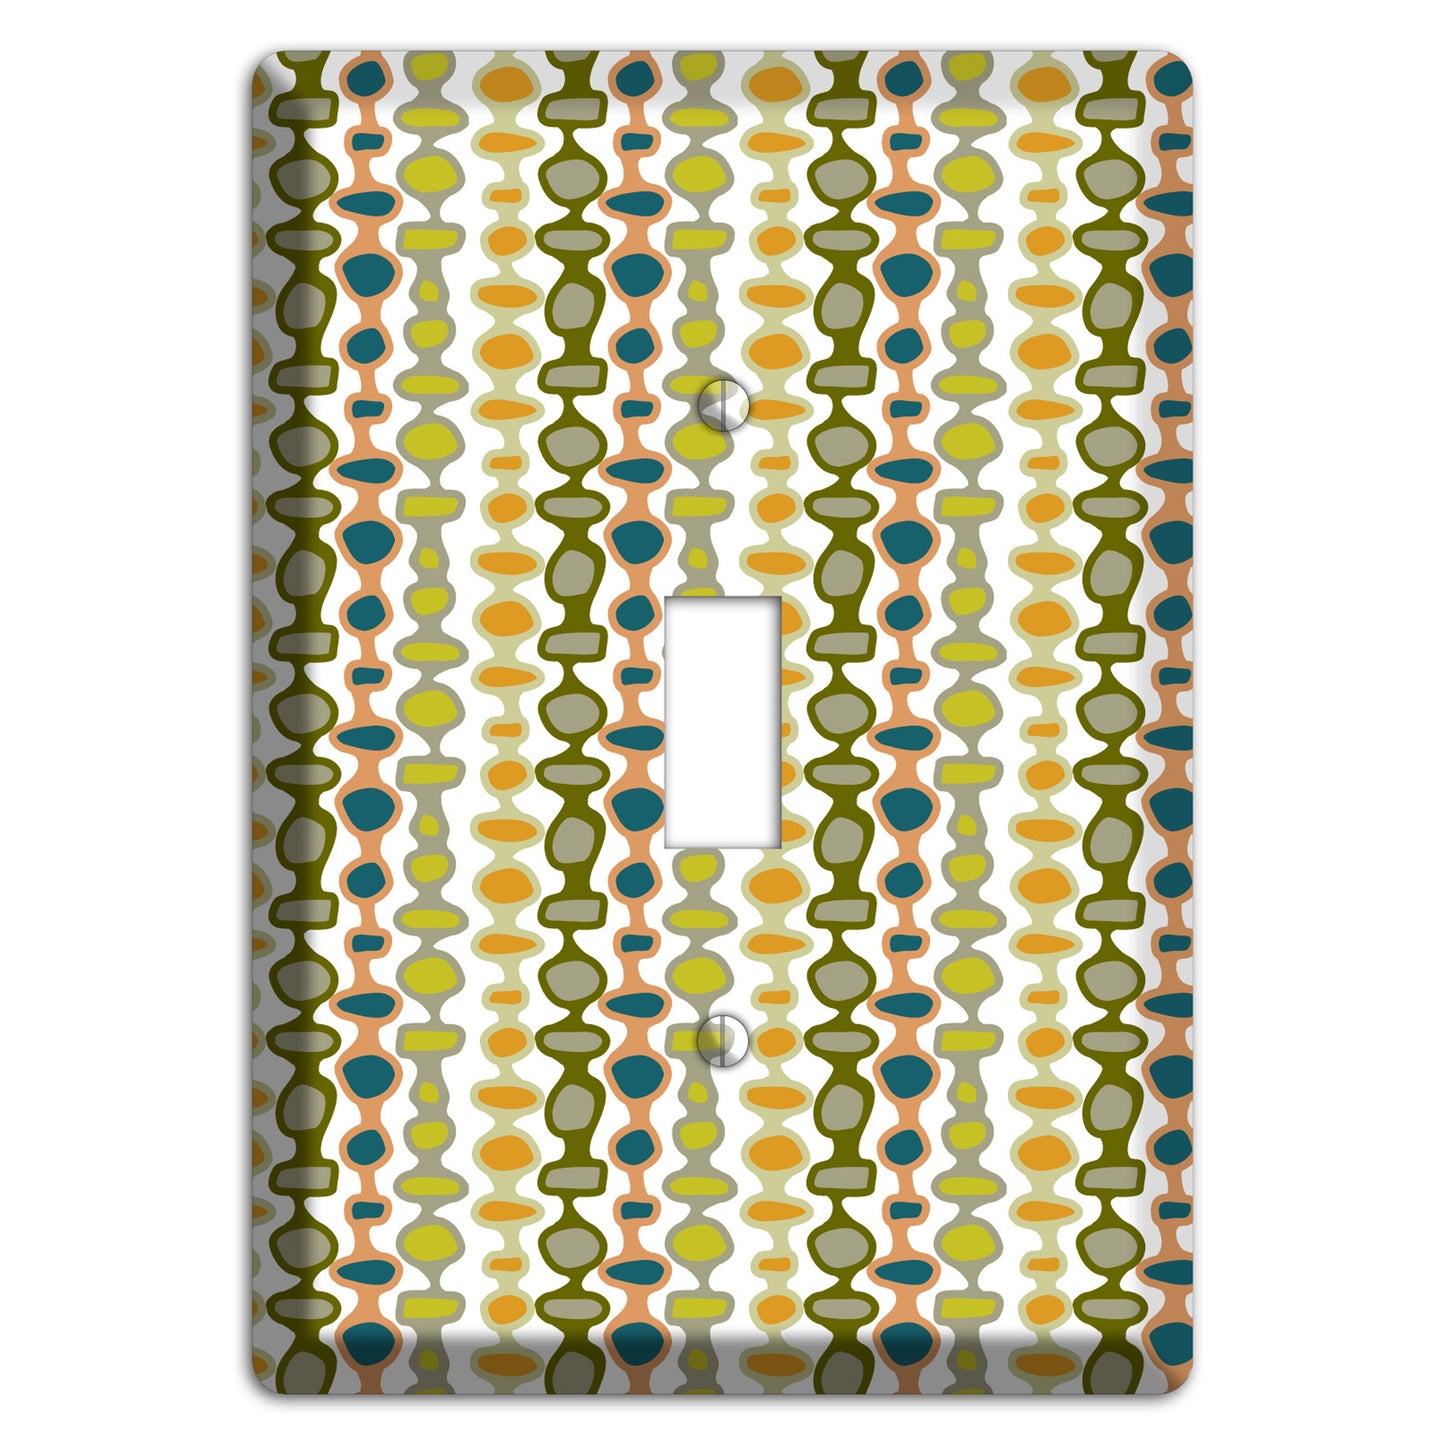 Multi Olive and Mustard Bead and Reel Cover Plates